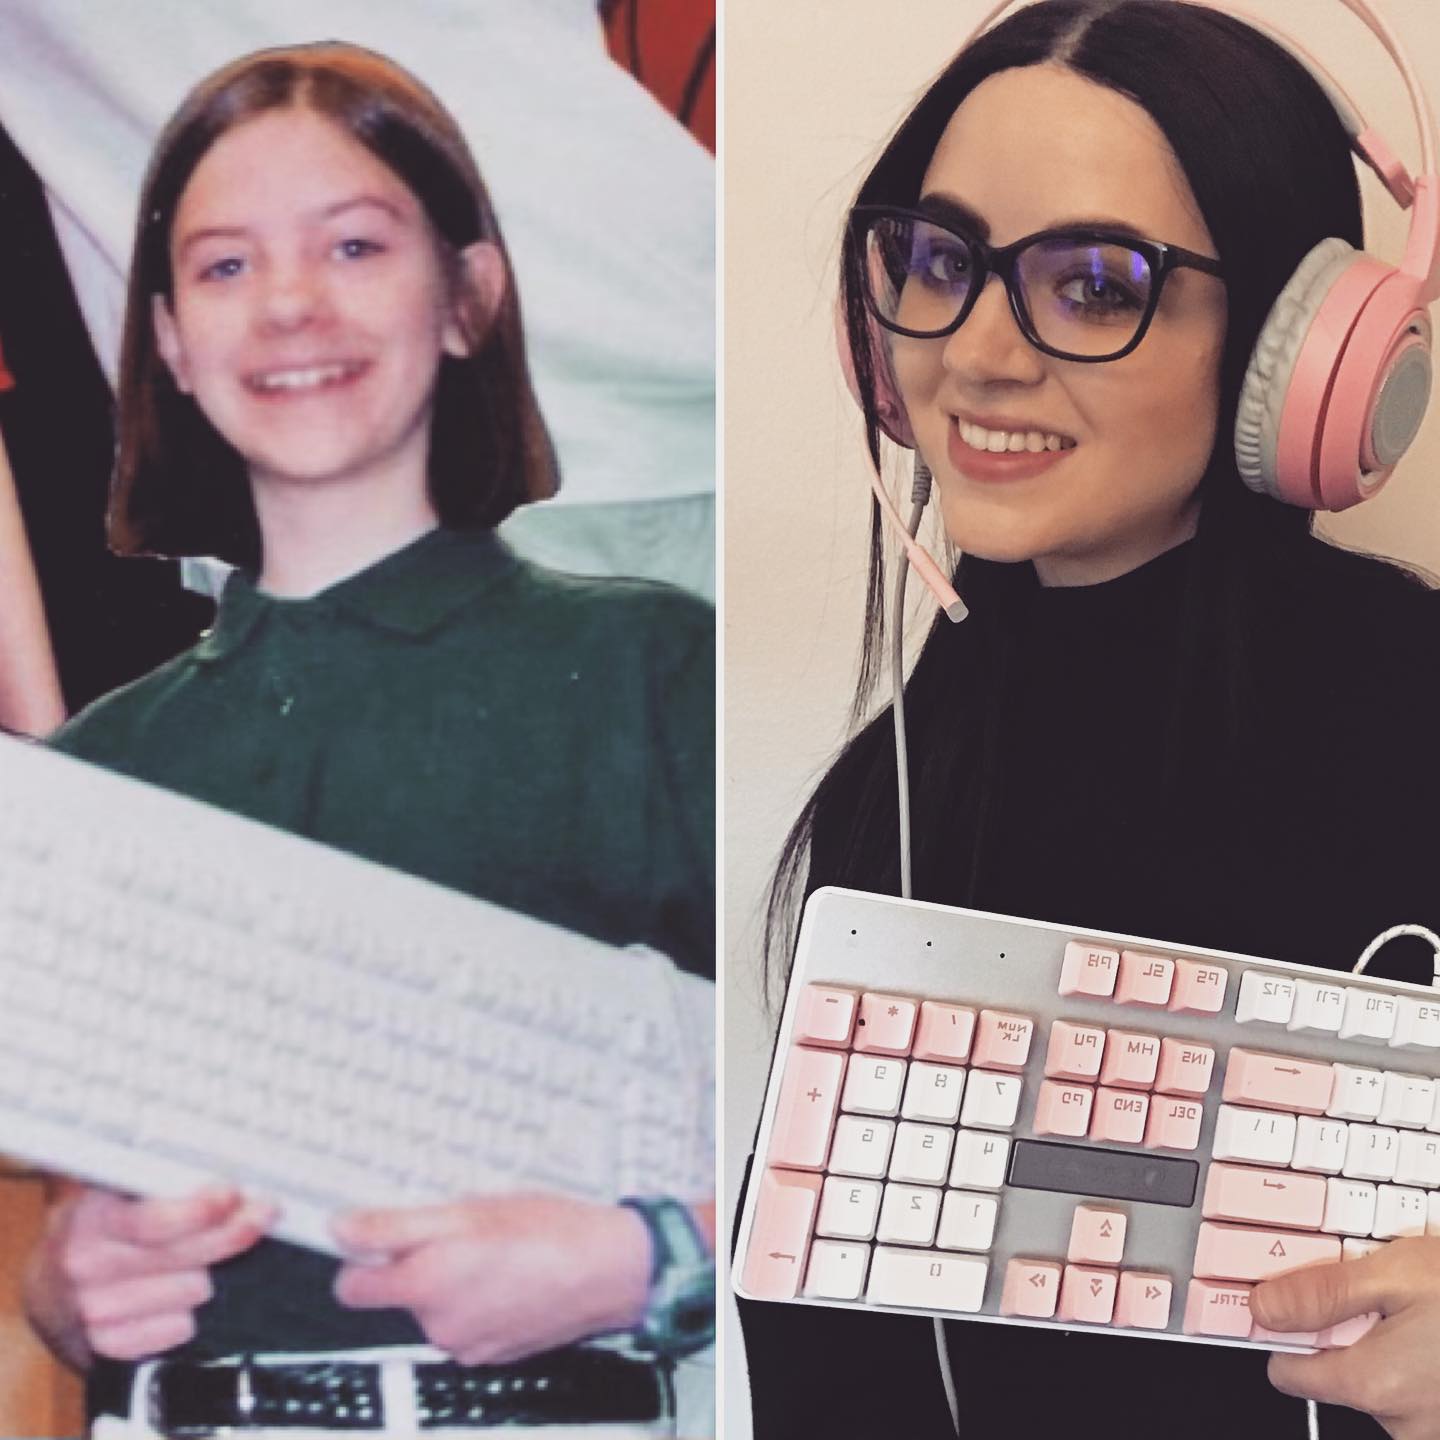 On left: Katherine Nieman in the 8th grade holding a keyboard. On right: Katherine Nieman at age 30 holding a keyboard.